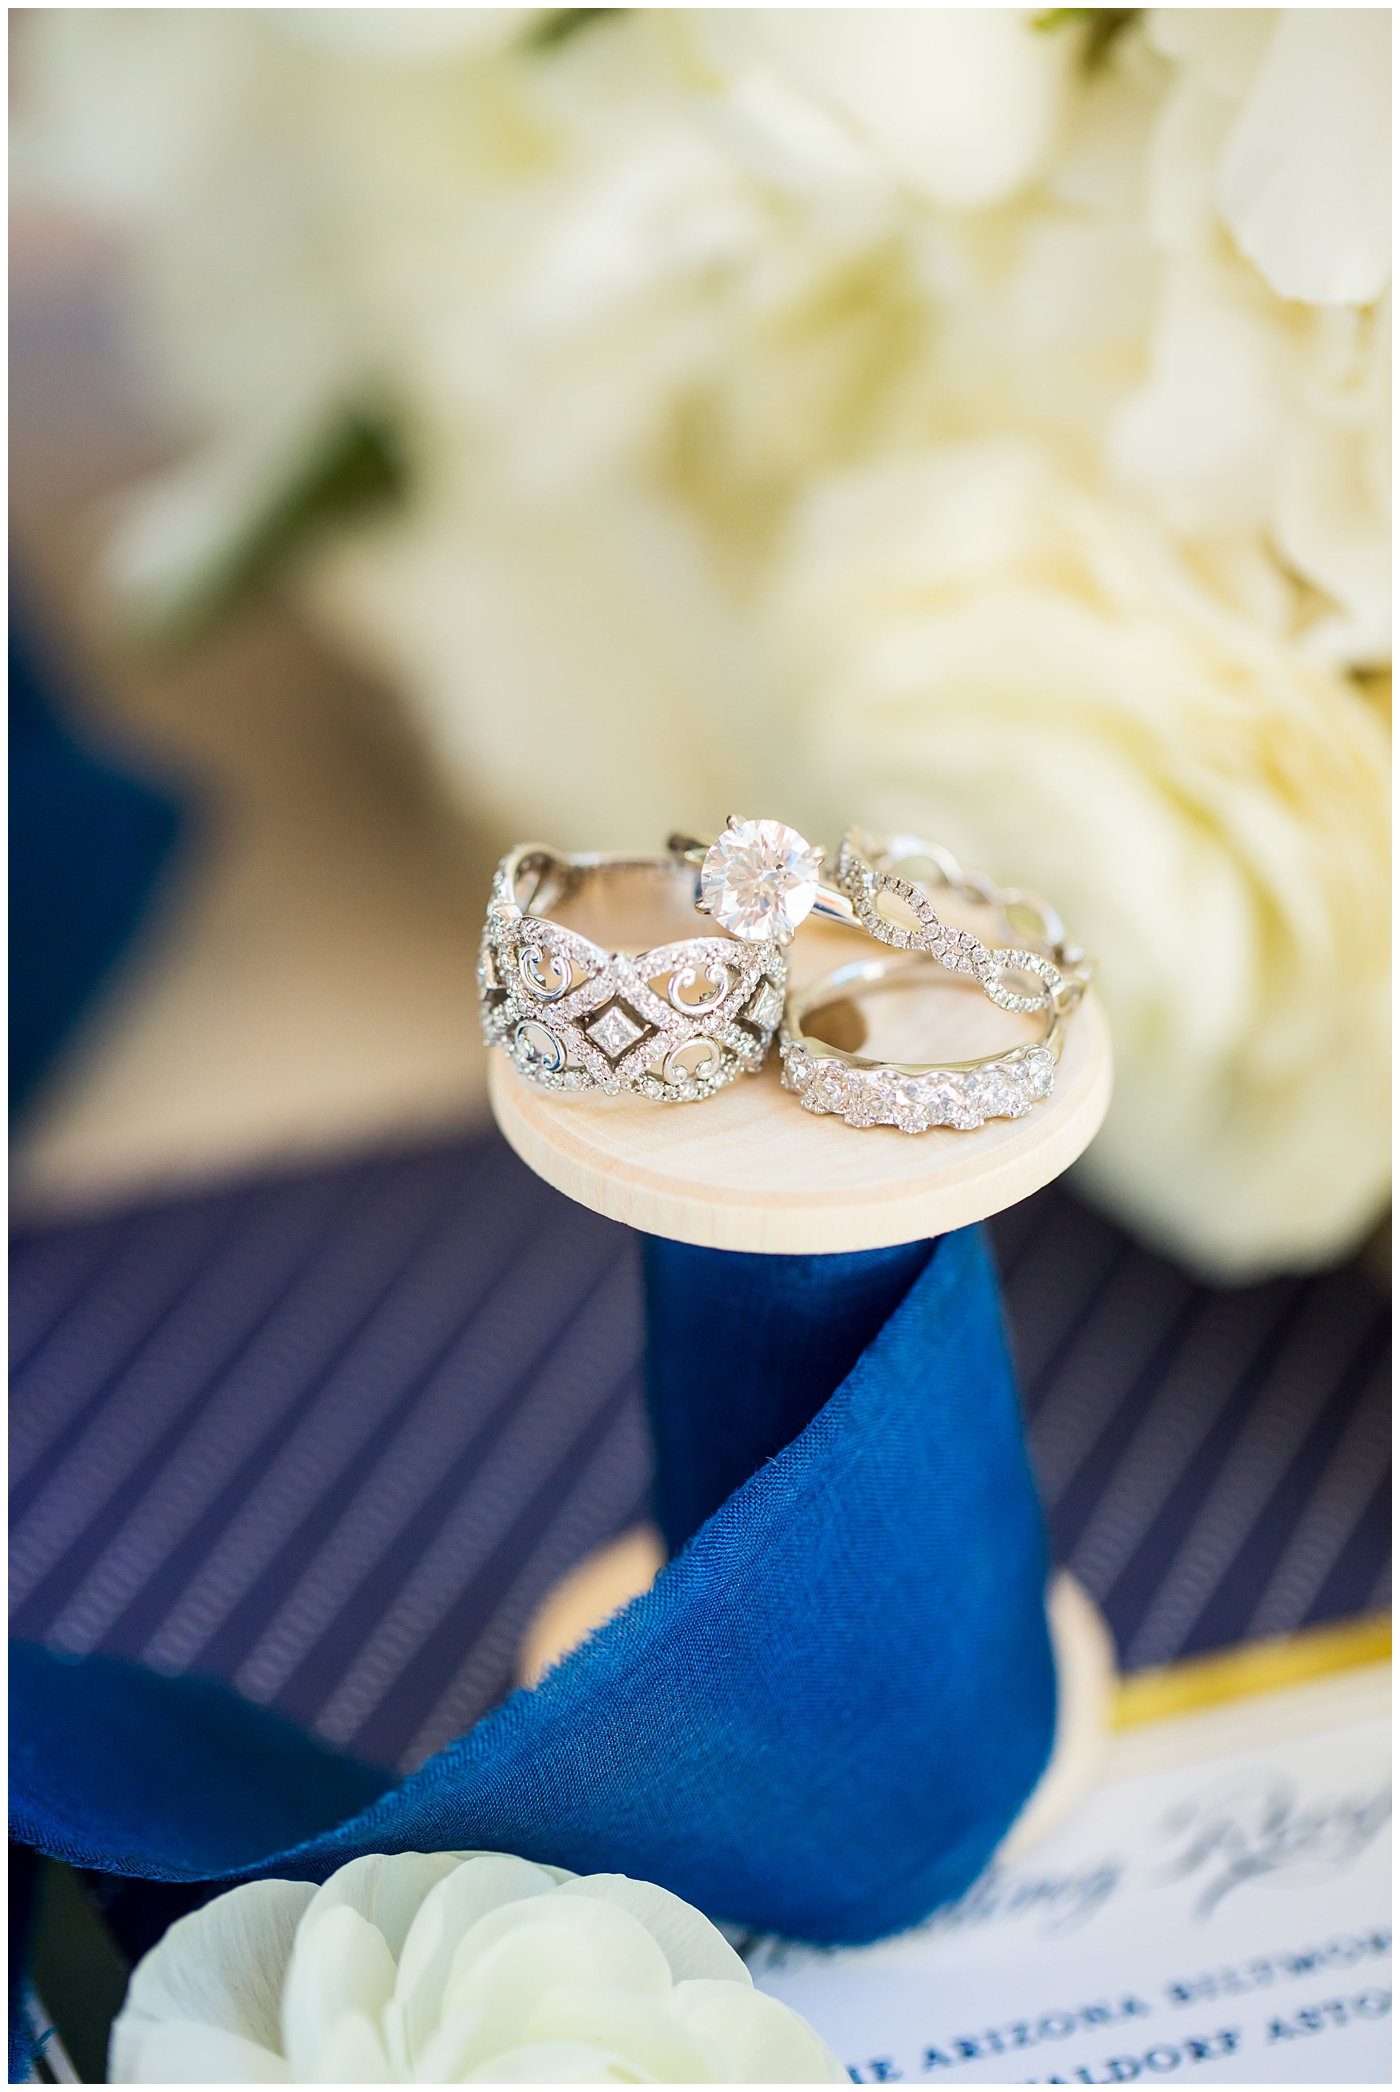 diamond wedding rings and bands with 3 separate bands wedding day details.